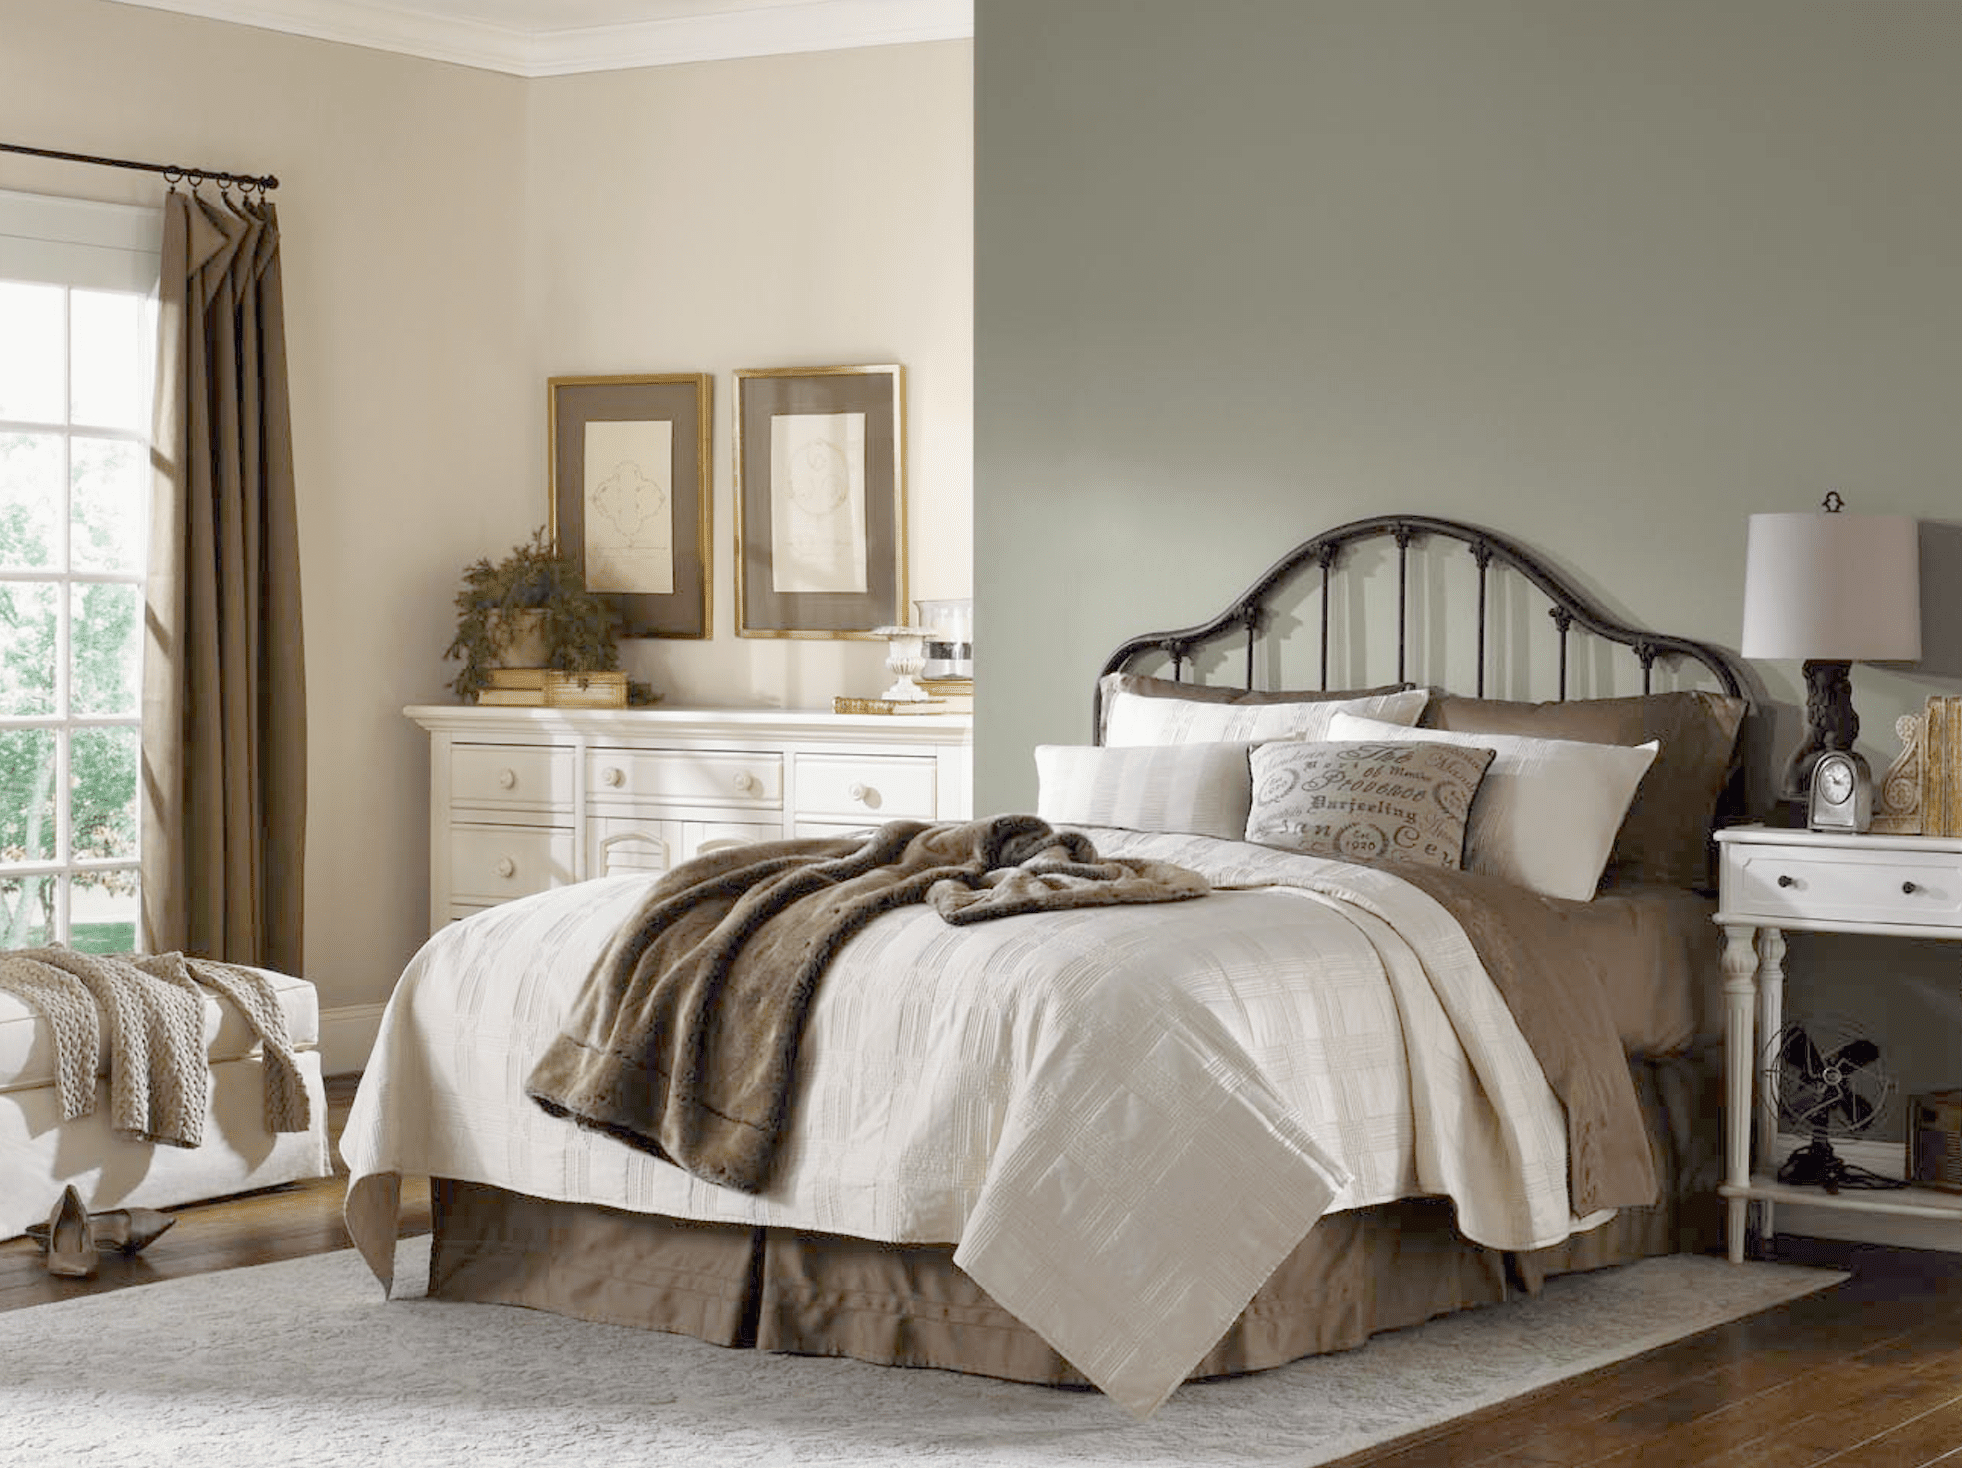 8 Relaxing Sherwin Williams Paint Colors For Bedrooms with dimensions 1962 X 1468